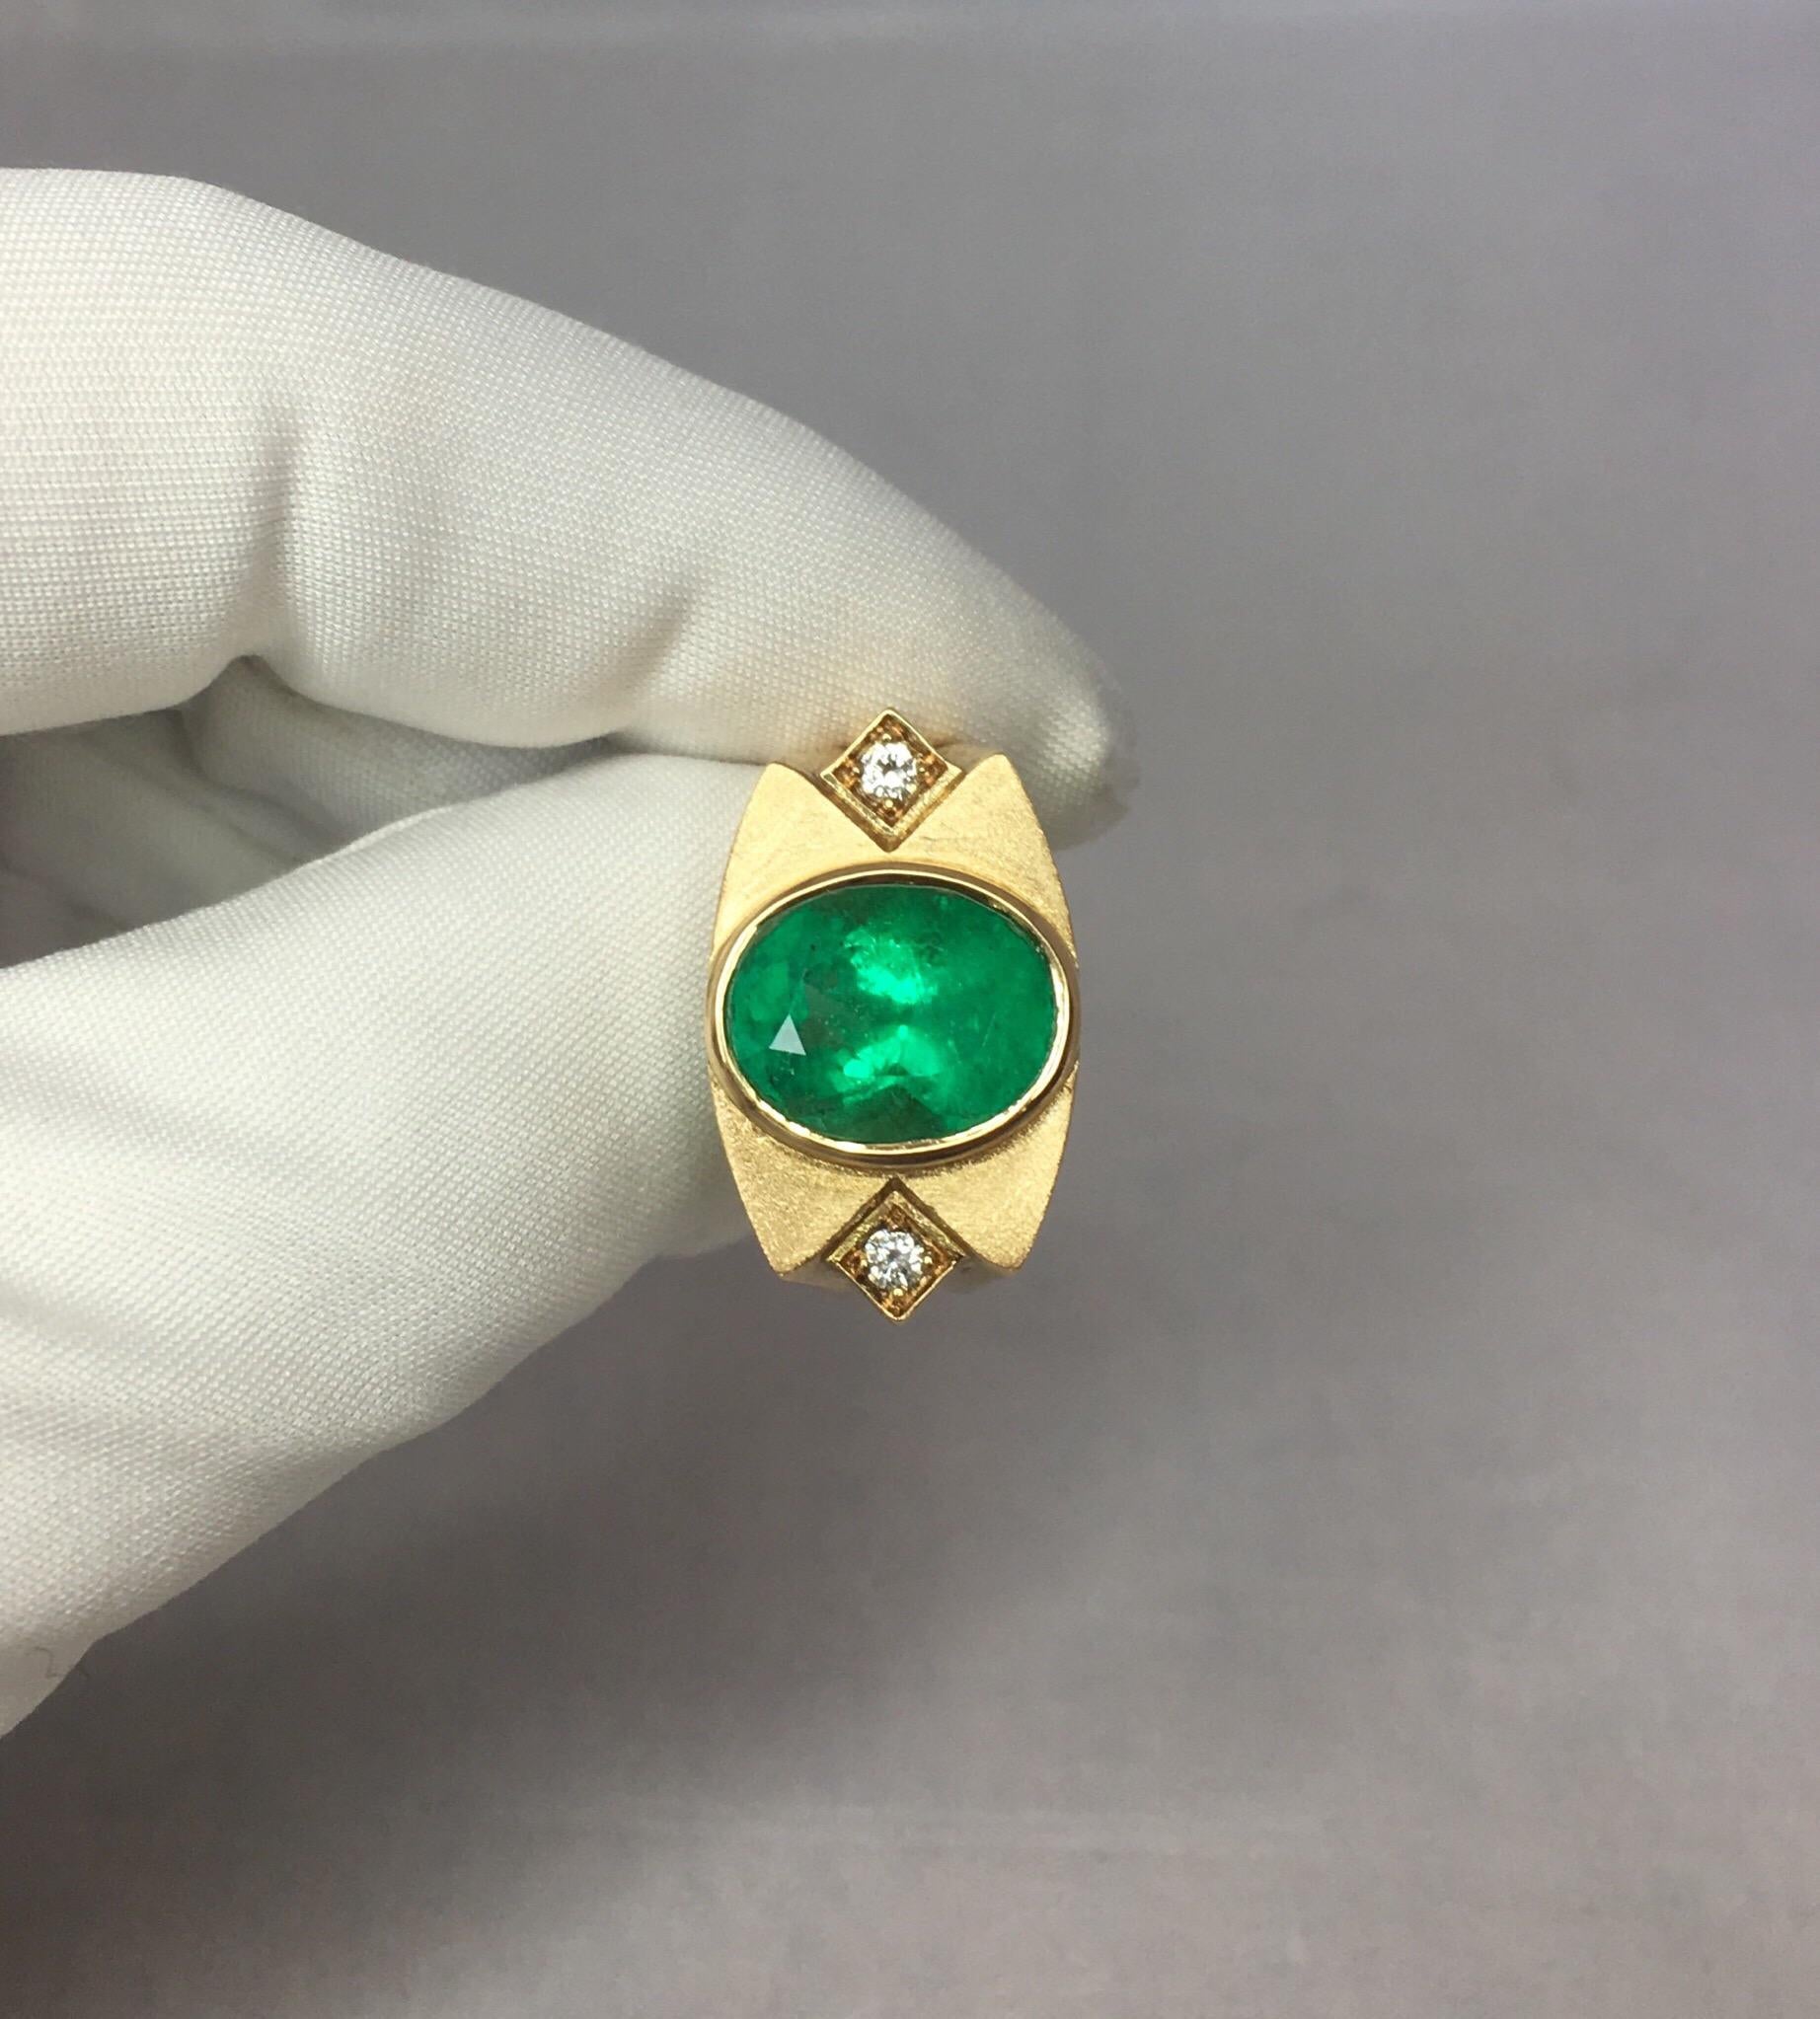 Fine natural vivid green Colombian emerald and diamond 18k gold ring.

Very unique style, custom made piece. High polished gold round the outside with a 'brushed gold' finish on top.

Bezel set with a large 5.75 carat stone with a bright vivid green